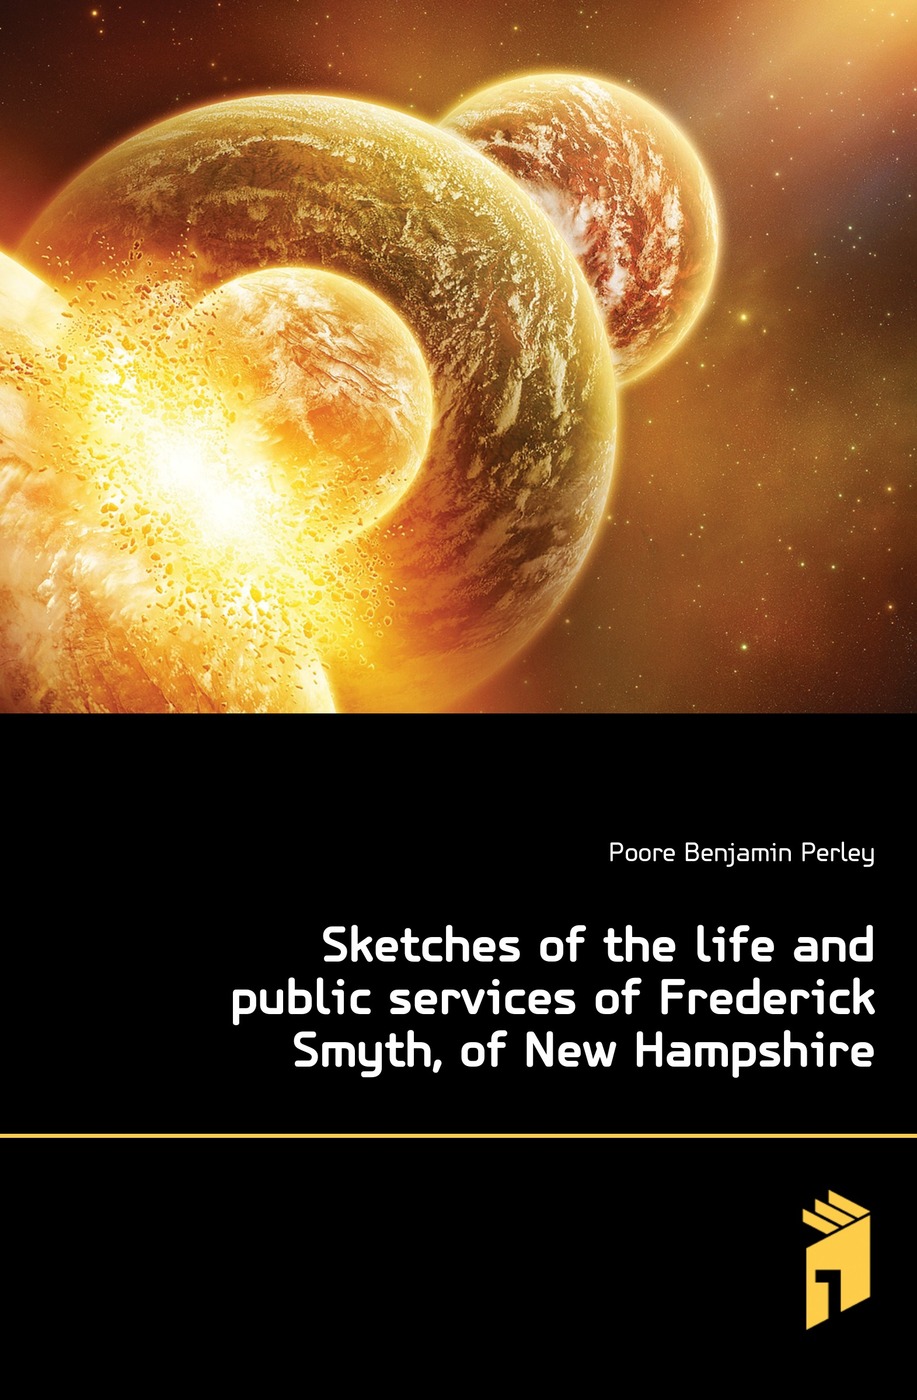 Sketches of the life and public services of Frederick Smyth, of New Hampshire